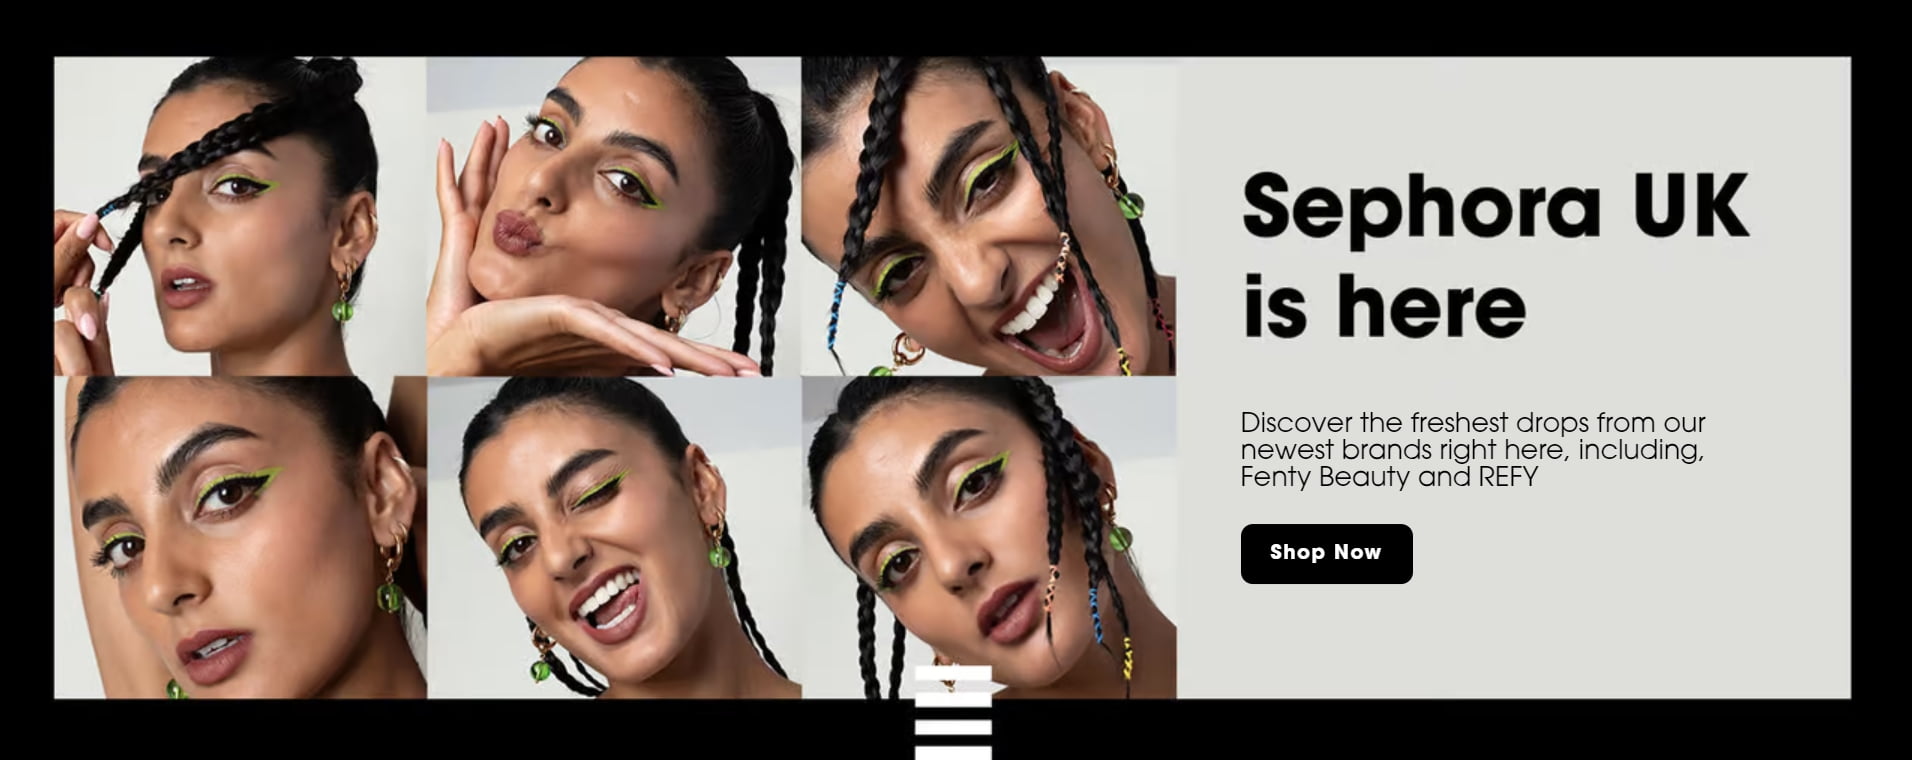 15% off off almost everything at Sephora UK